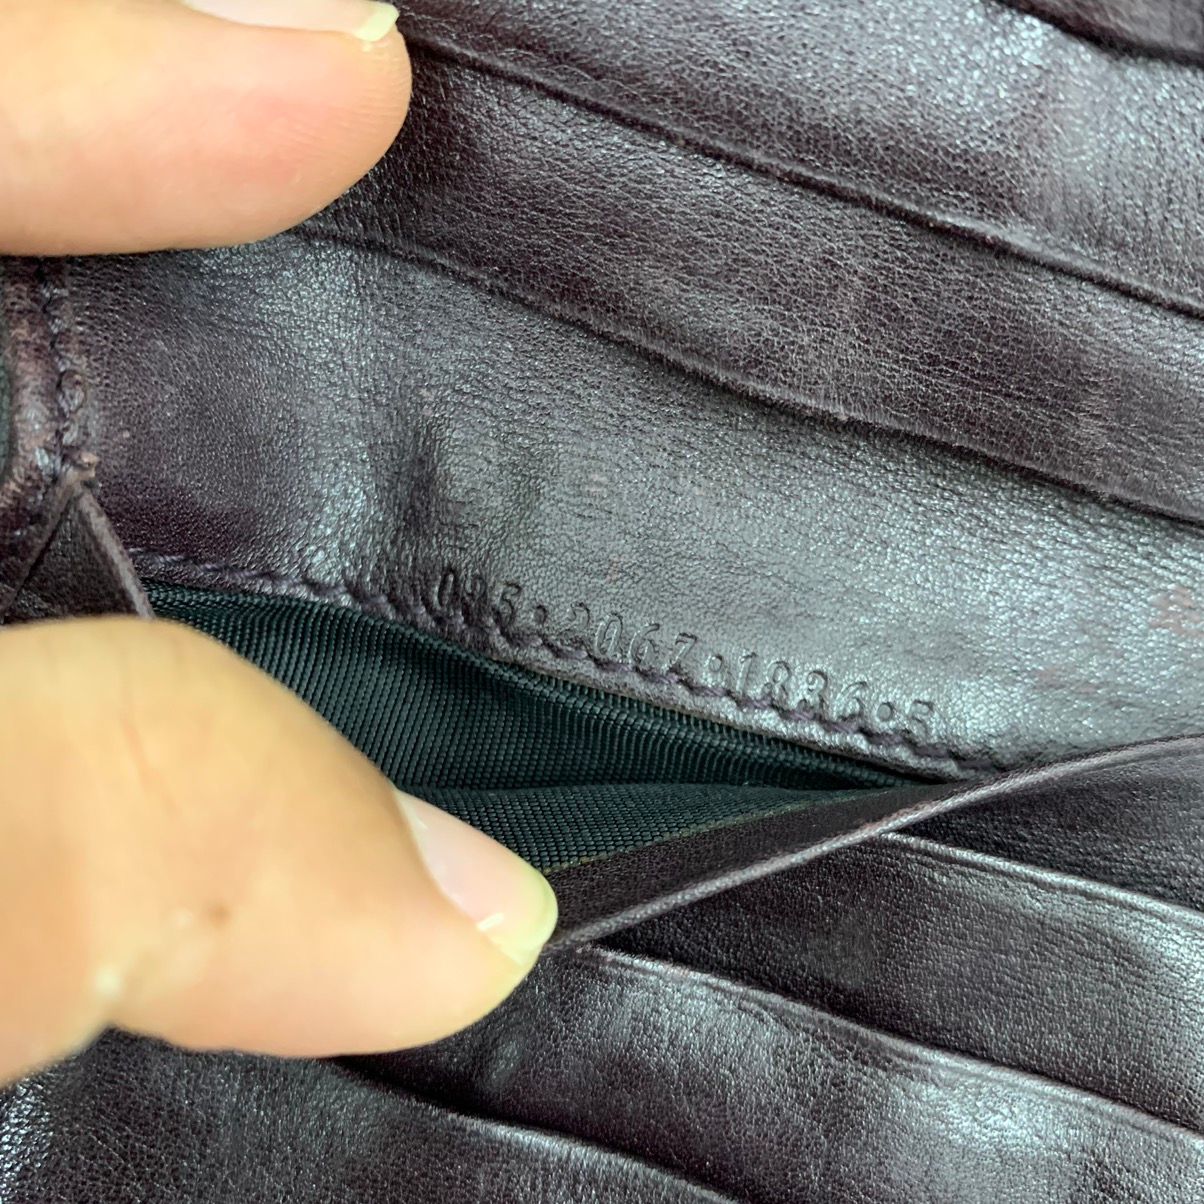 Thrashed Gucci Leather Wallet - 6